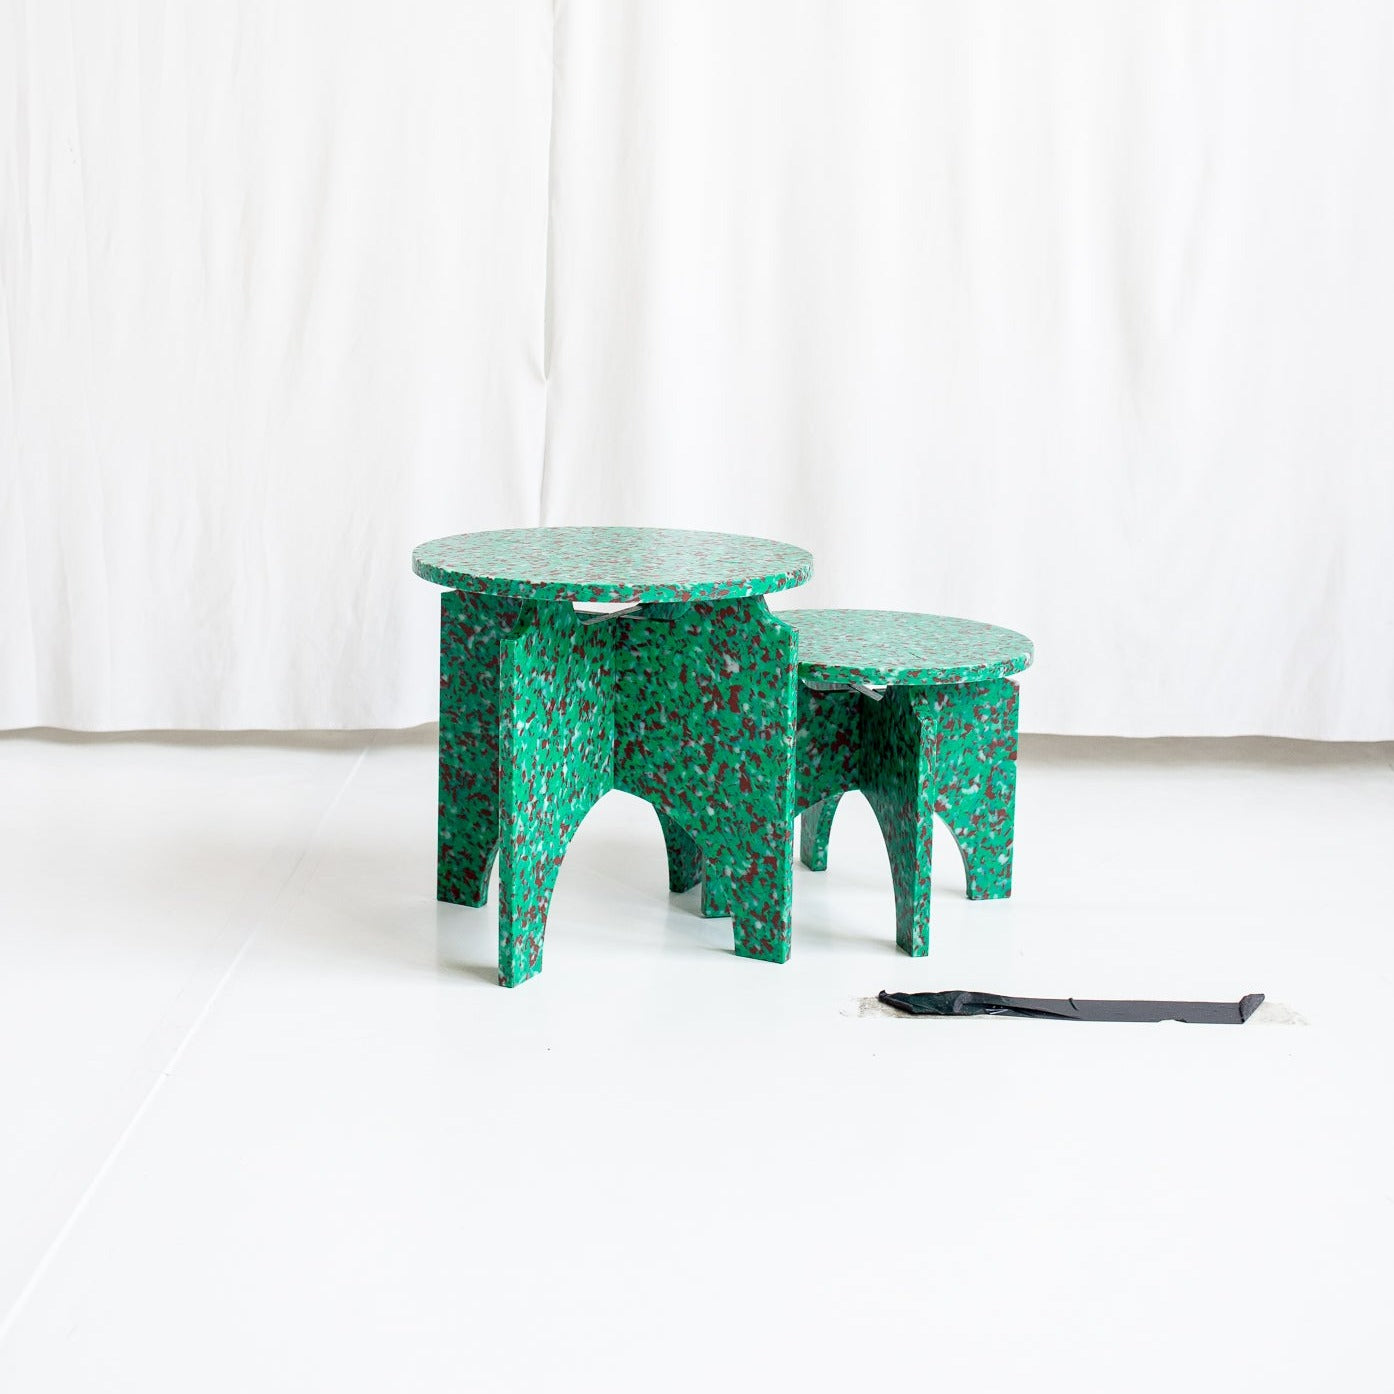 TWO GREEN STOOLS BY THE MINIMONO PROJECT - BRAND FOR ECO FRIENDLY - PLAYFUL - MULTI FUNCTIONAL - SUSTAINABLE - HIGH QUALITY - DESIGN FURNITURE FROM RECYCLED PLASTIC FOR BOTH ADULT AND CHILDREN MADE IN BERLIN GERMANY